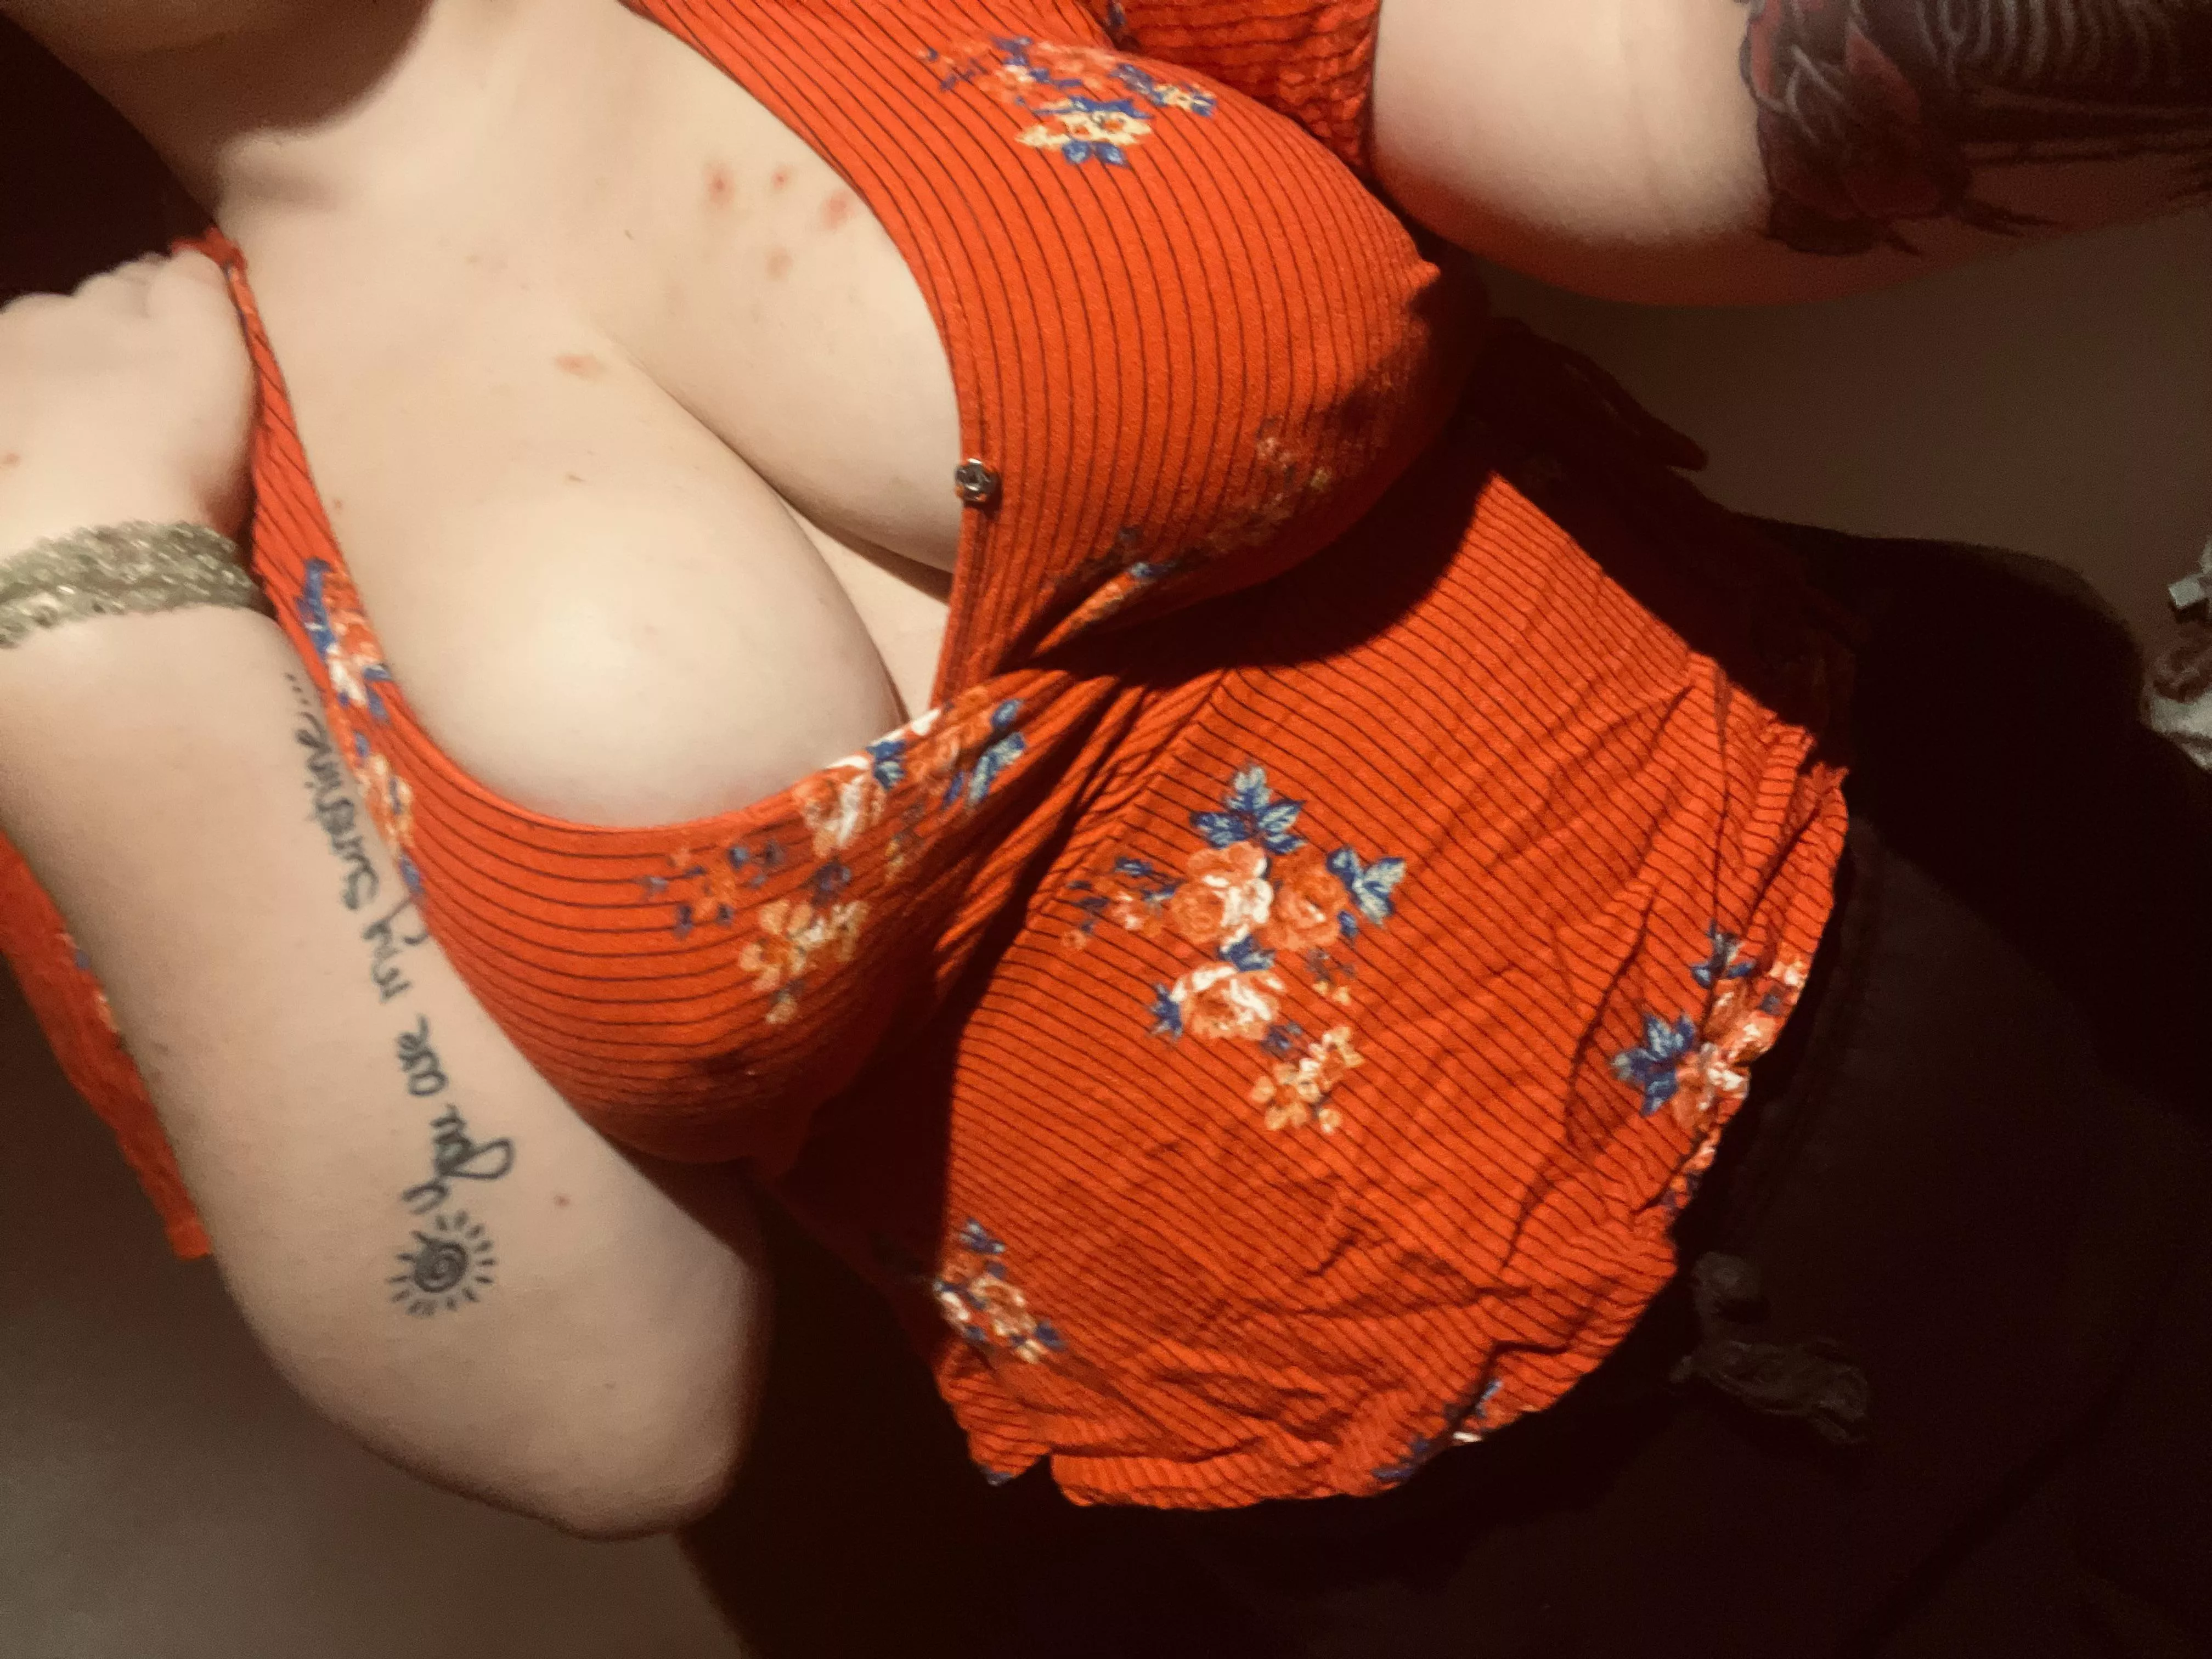 Pregnant Breast Growth Porn Gallery - Ugh worst part of being pregnant & my boobs growing so fast is I have to  retire my fav shirt ðŸ˜¢ðŸ˜© nudes : EngorgedVeinyBreasts | NUDE-PICS.ORG